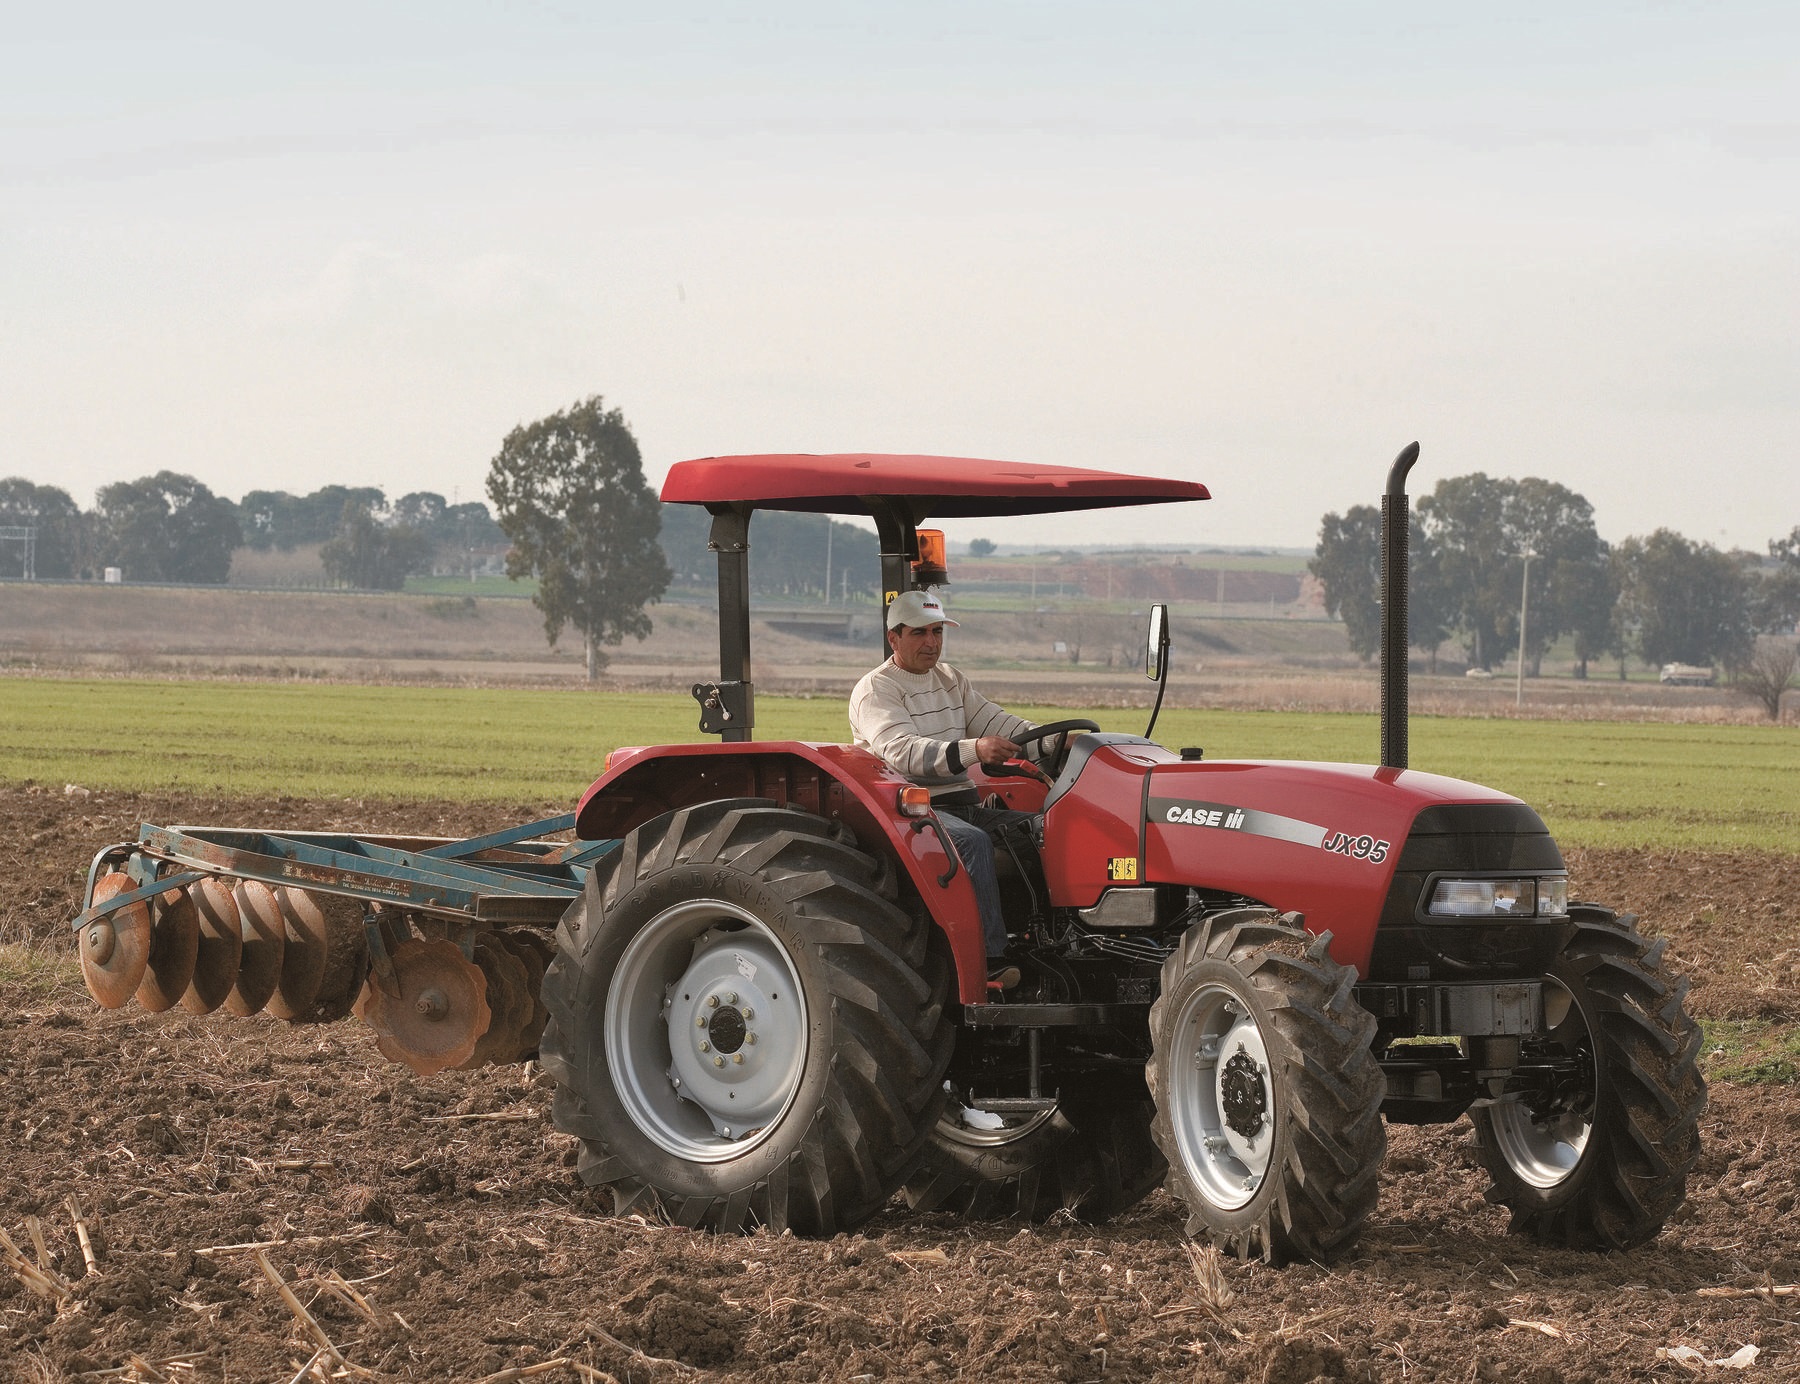 SUPPORTING AGRICULTURAL GROWTH IN AFRICA AND THE MIDDLE EAST WITH CASE IHS RED POWER